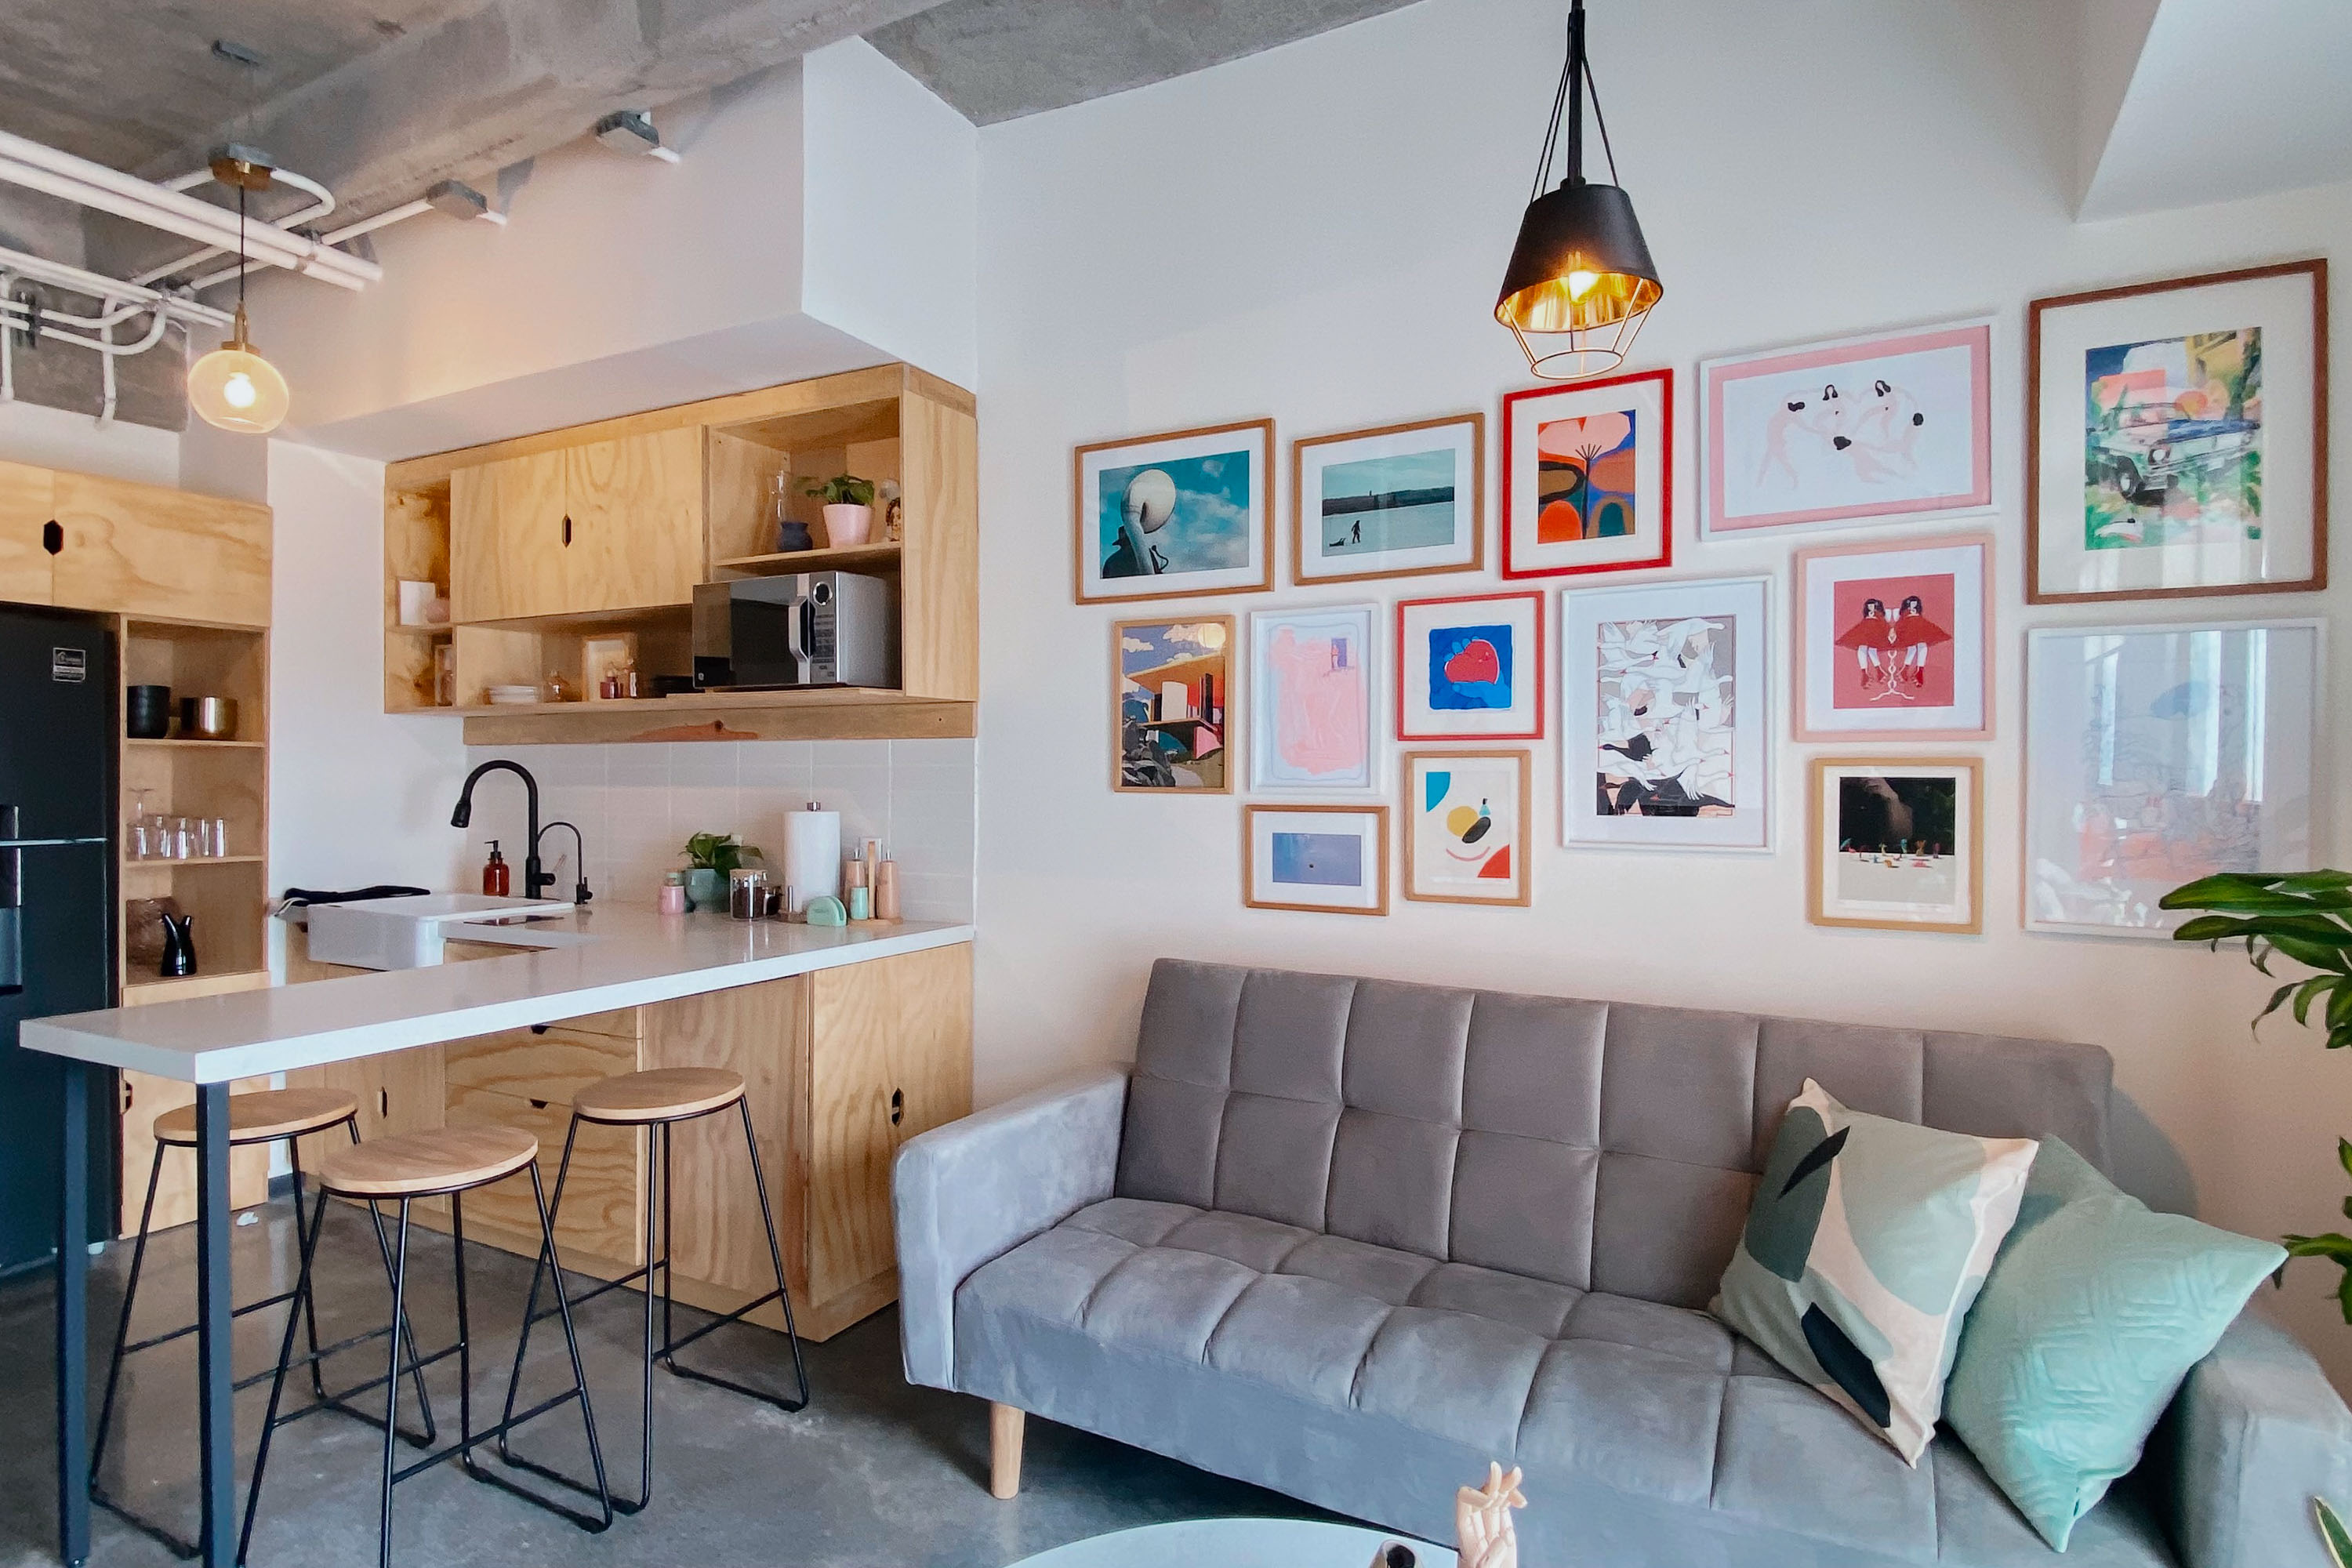 Studio apartment living and kitchen area, with a grey couch and art-filled gallery wall to the right and wooden cabinets and bar stools on the left. 